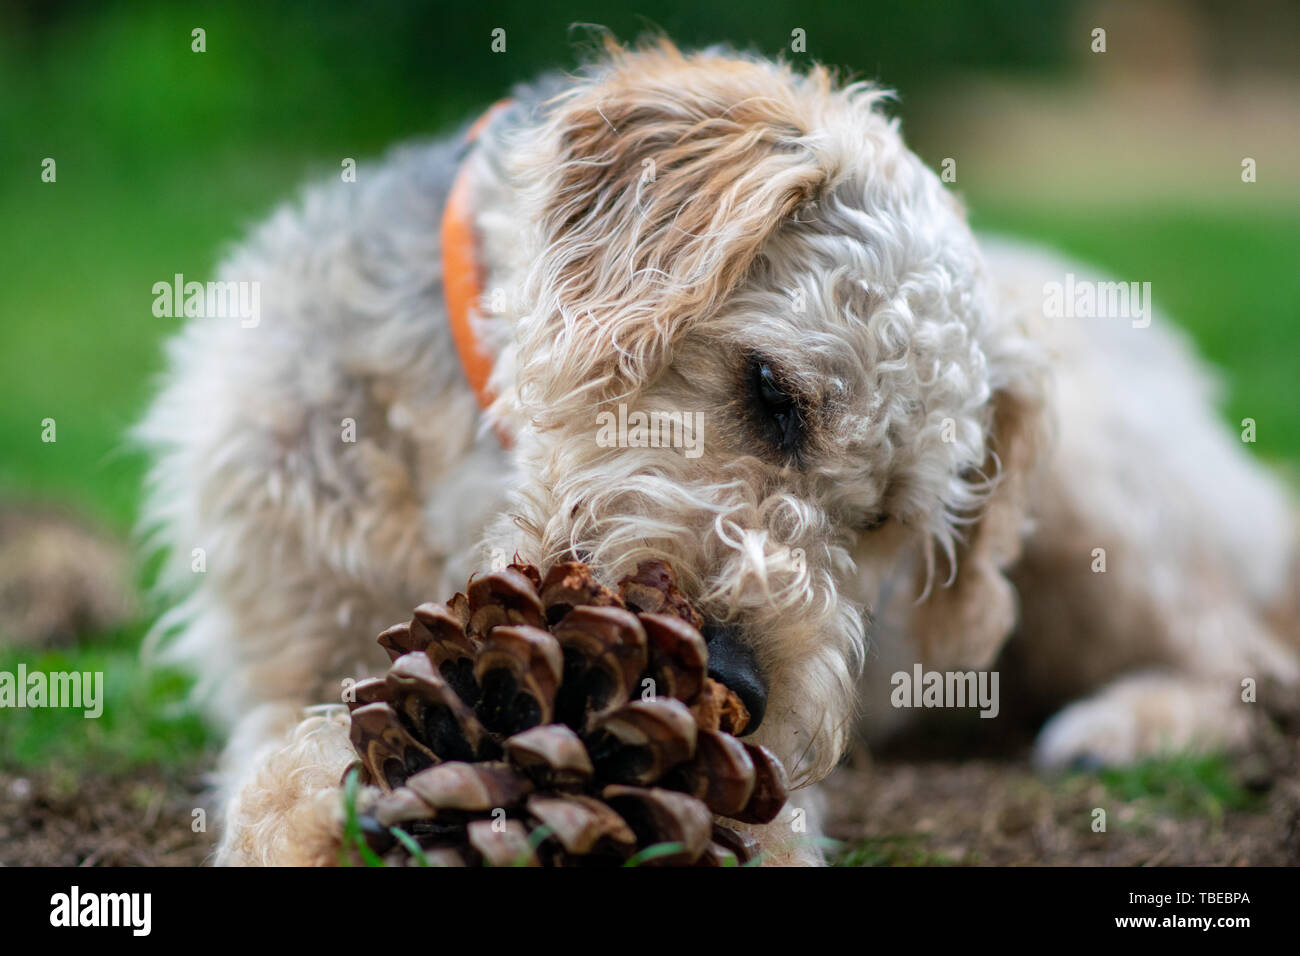 Dog on grass, chewing. Stock Photo